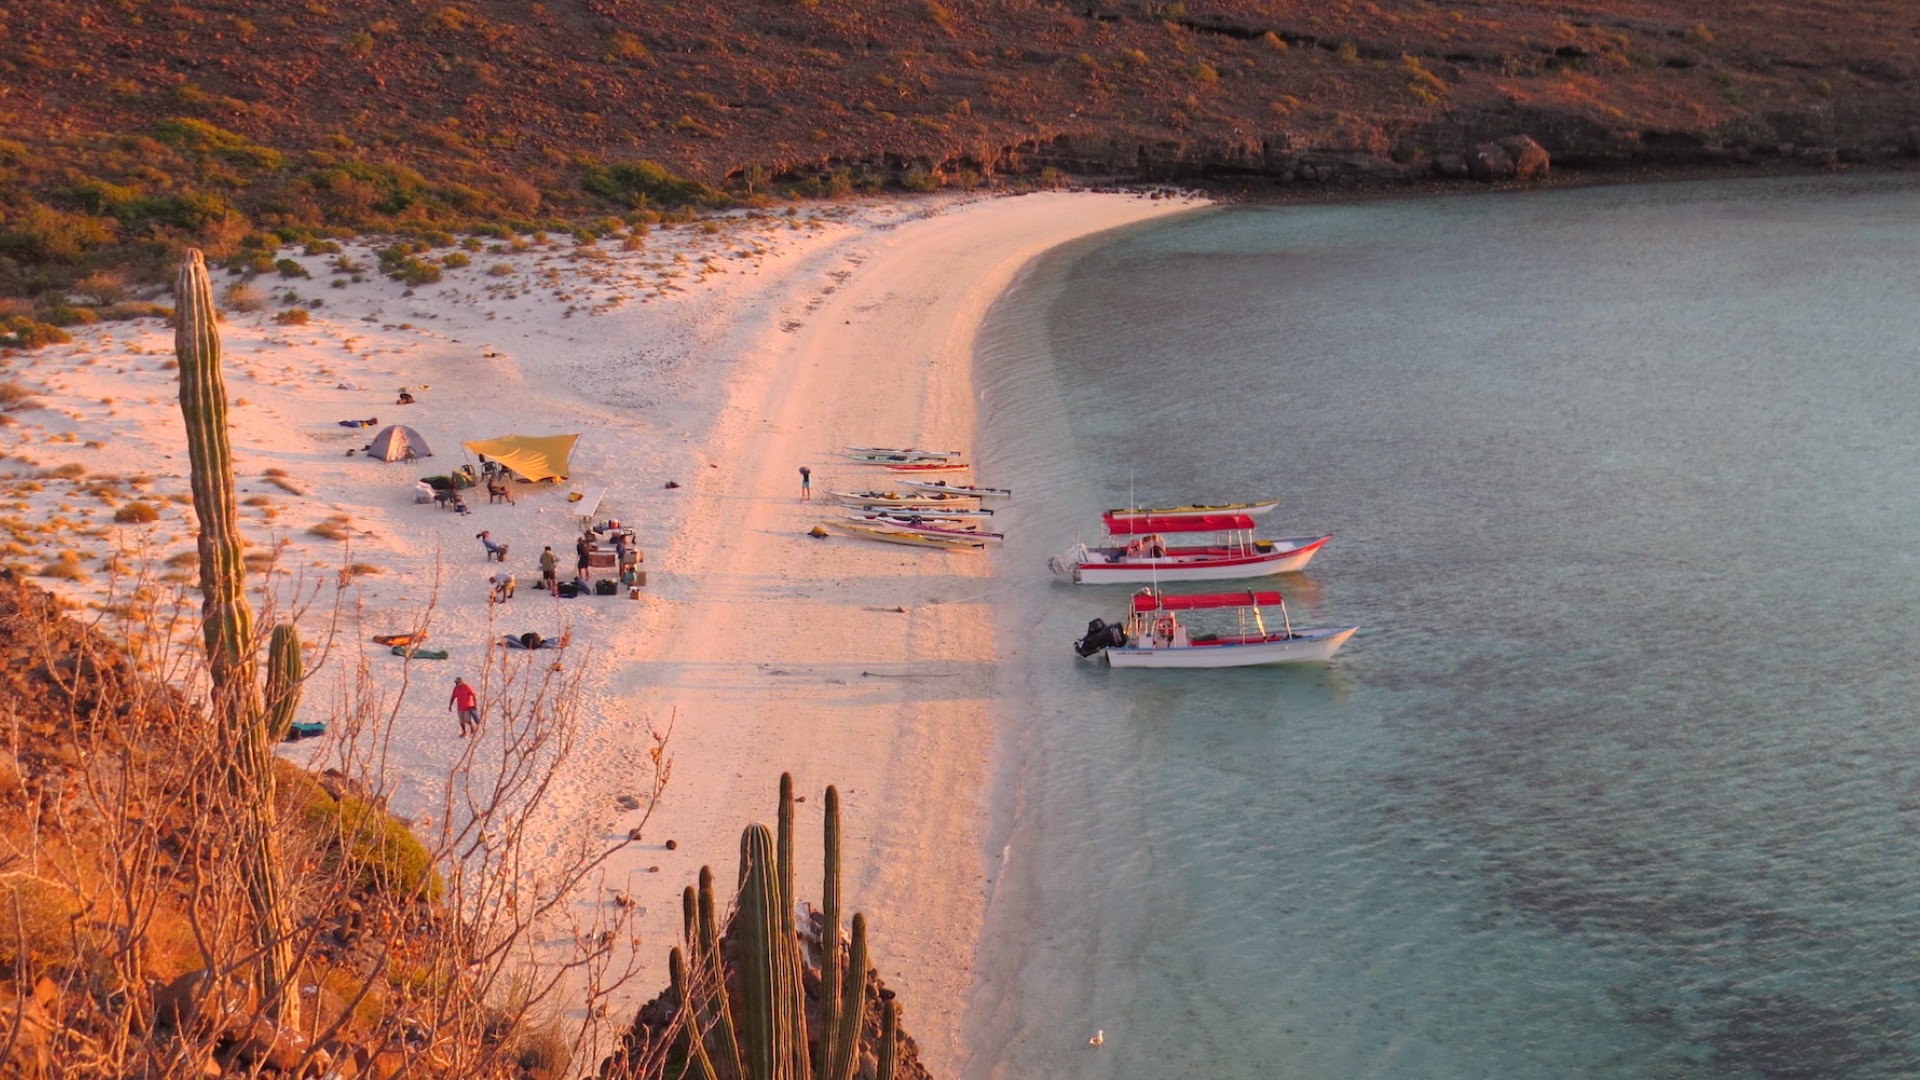 Birdseye view of a group camping set up on a beach in Baja